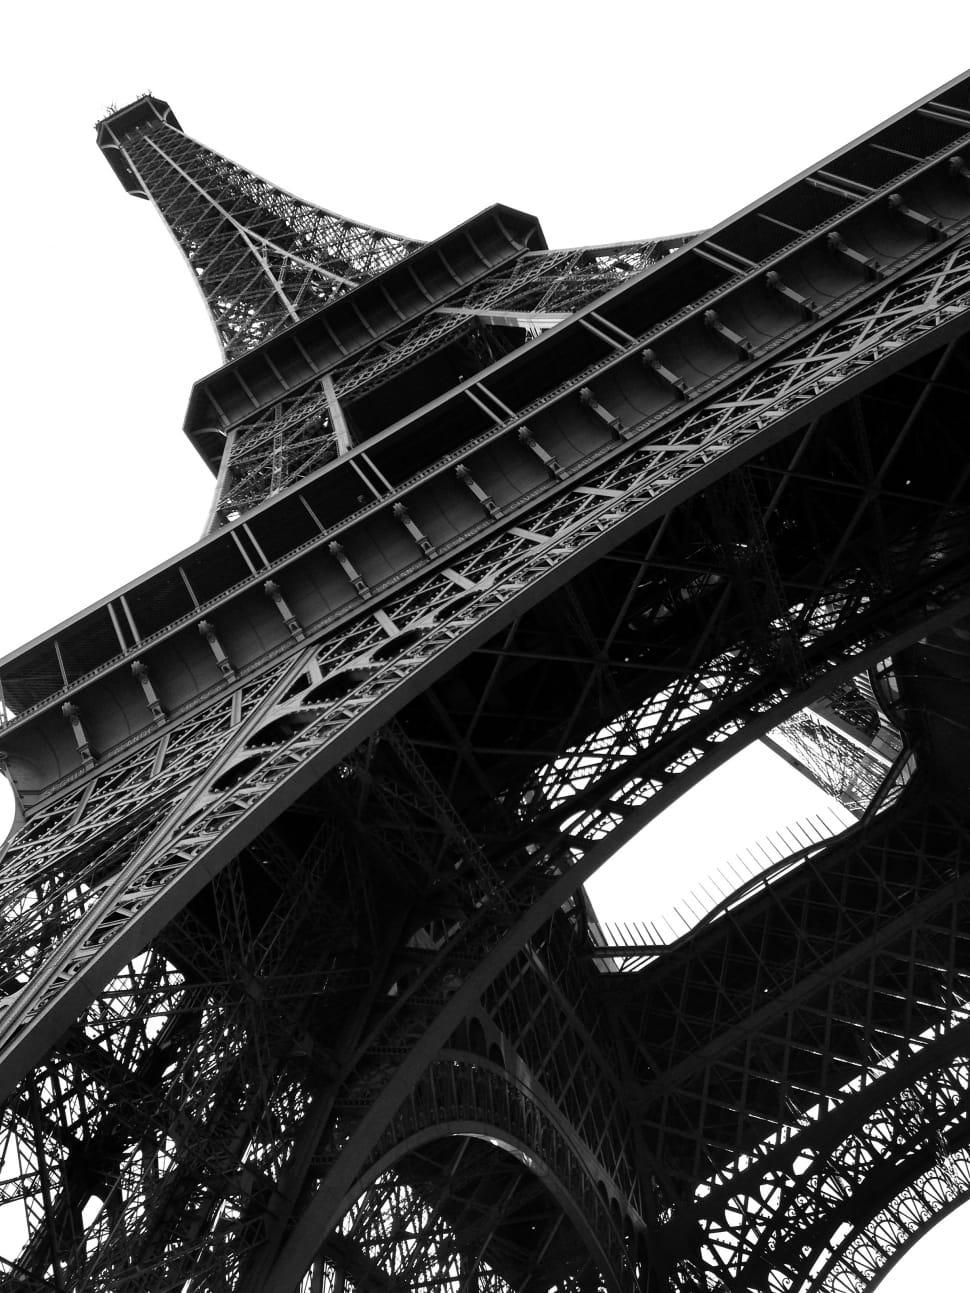 The Eiffel Tower, Paris, France, low angle view, architecture preview